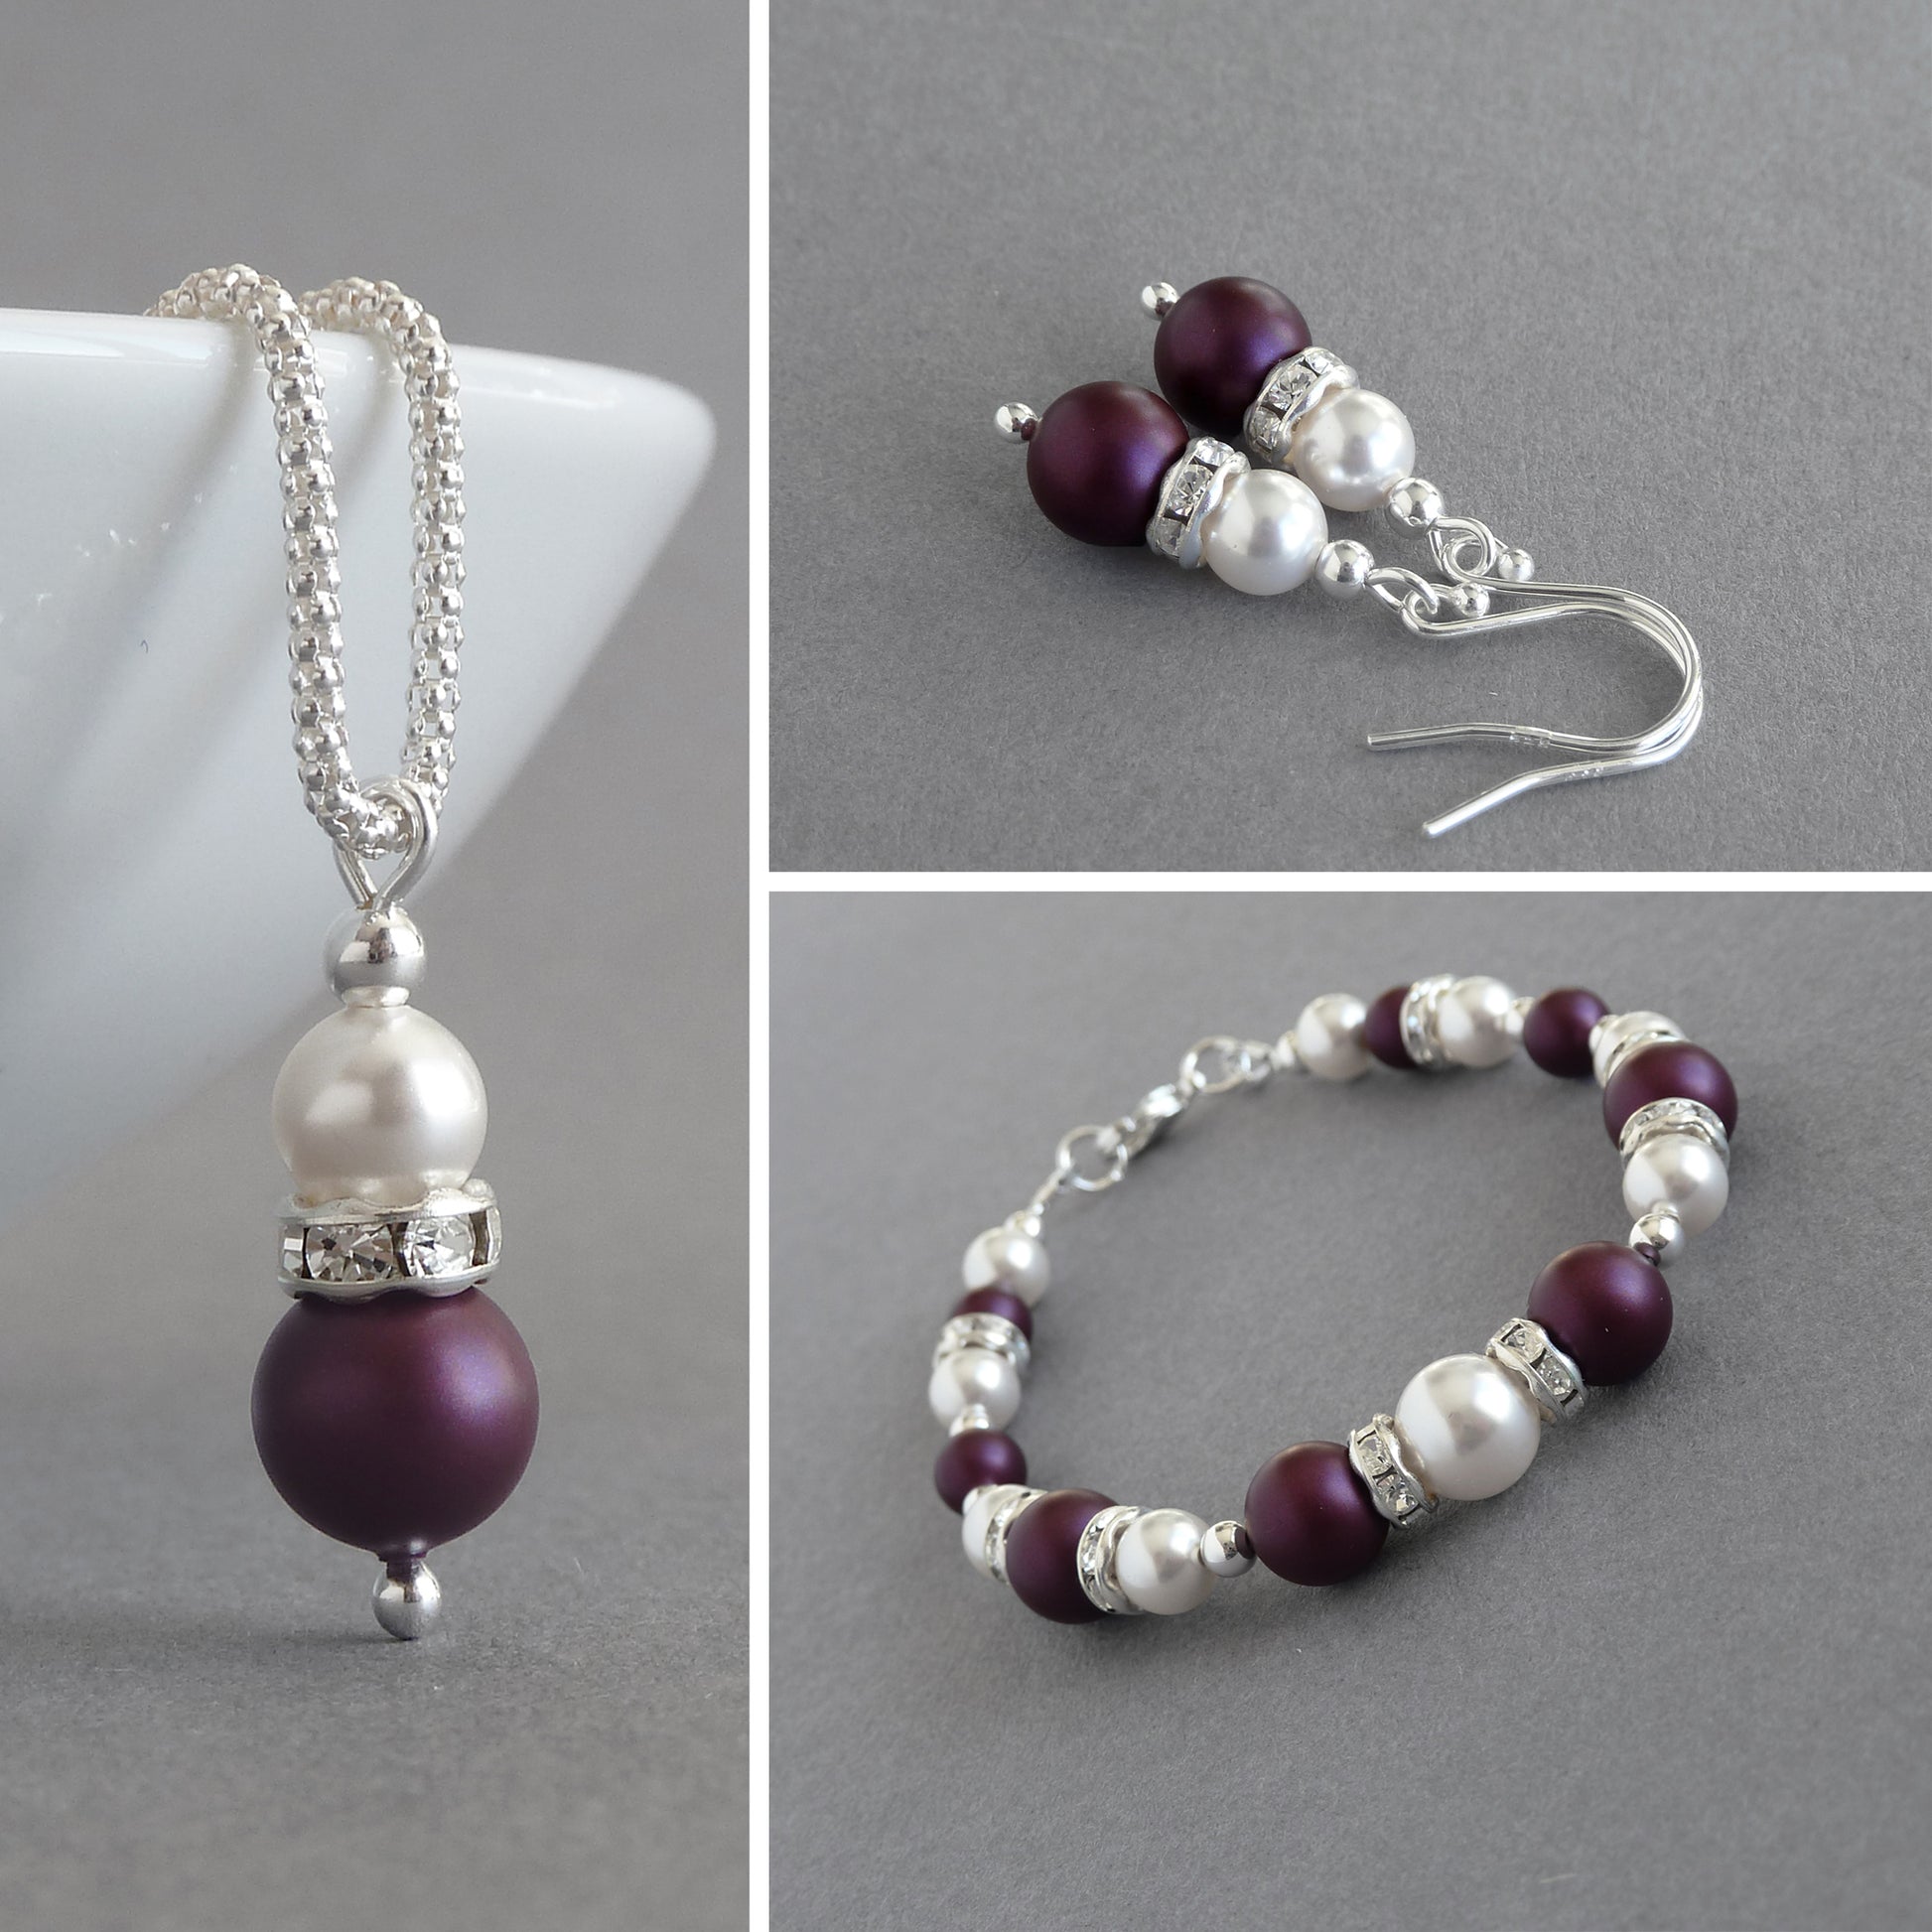 Plum pearl and crystal jewellery set by Anna King